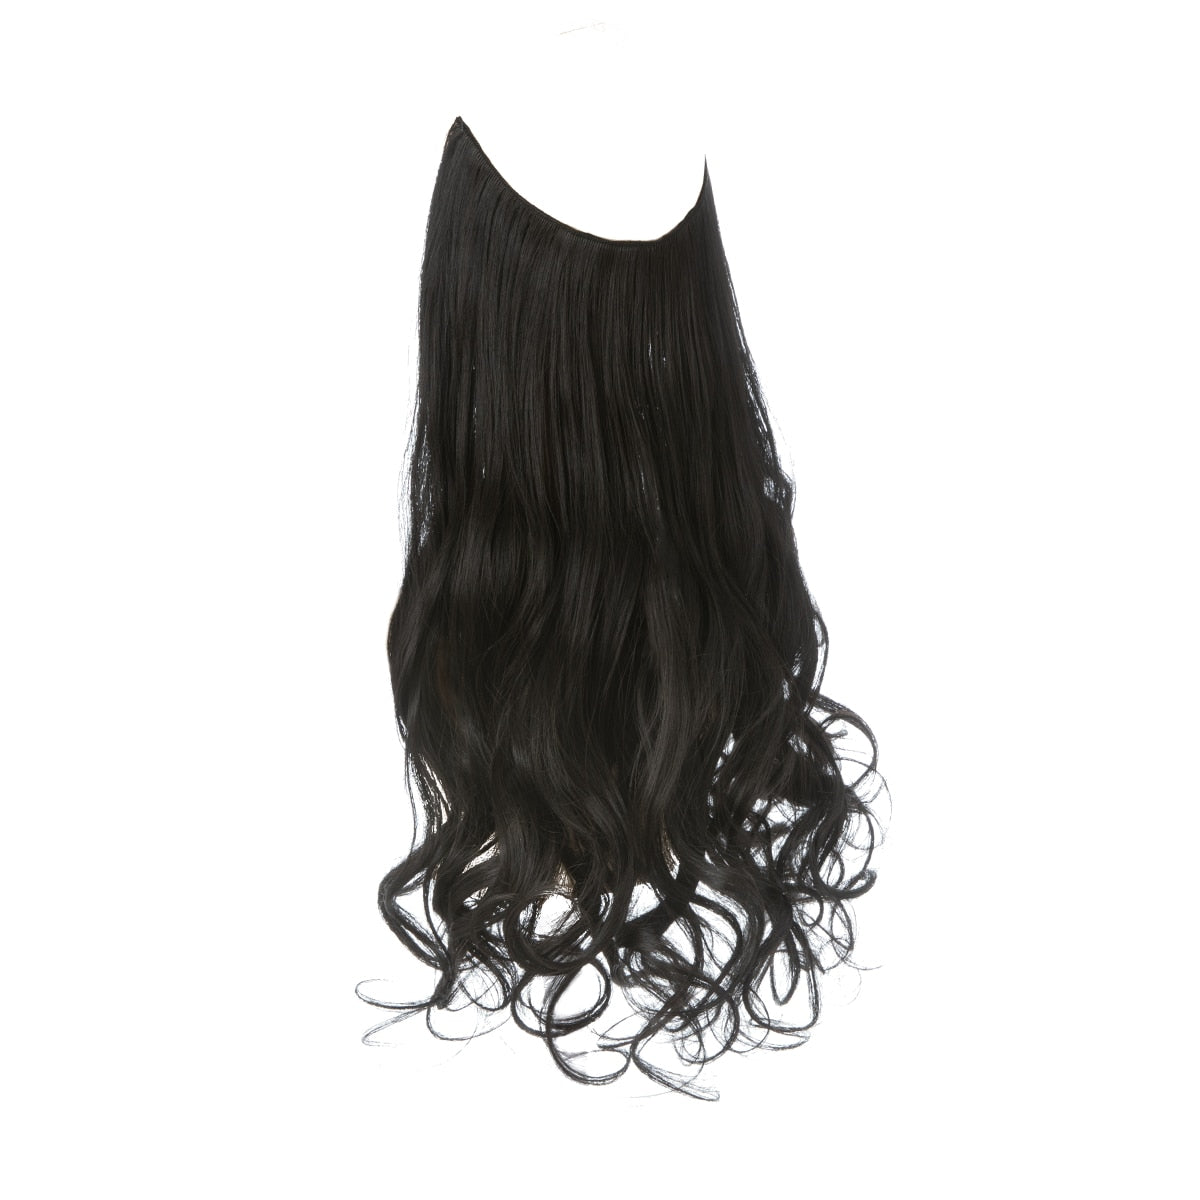 TEEK - Invisible Synth No Clip No Comb Wave Hair Extensions | Dark Varieties HAIR theteekdotcom Off Black 14inches 